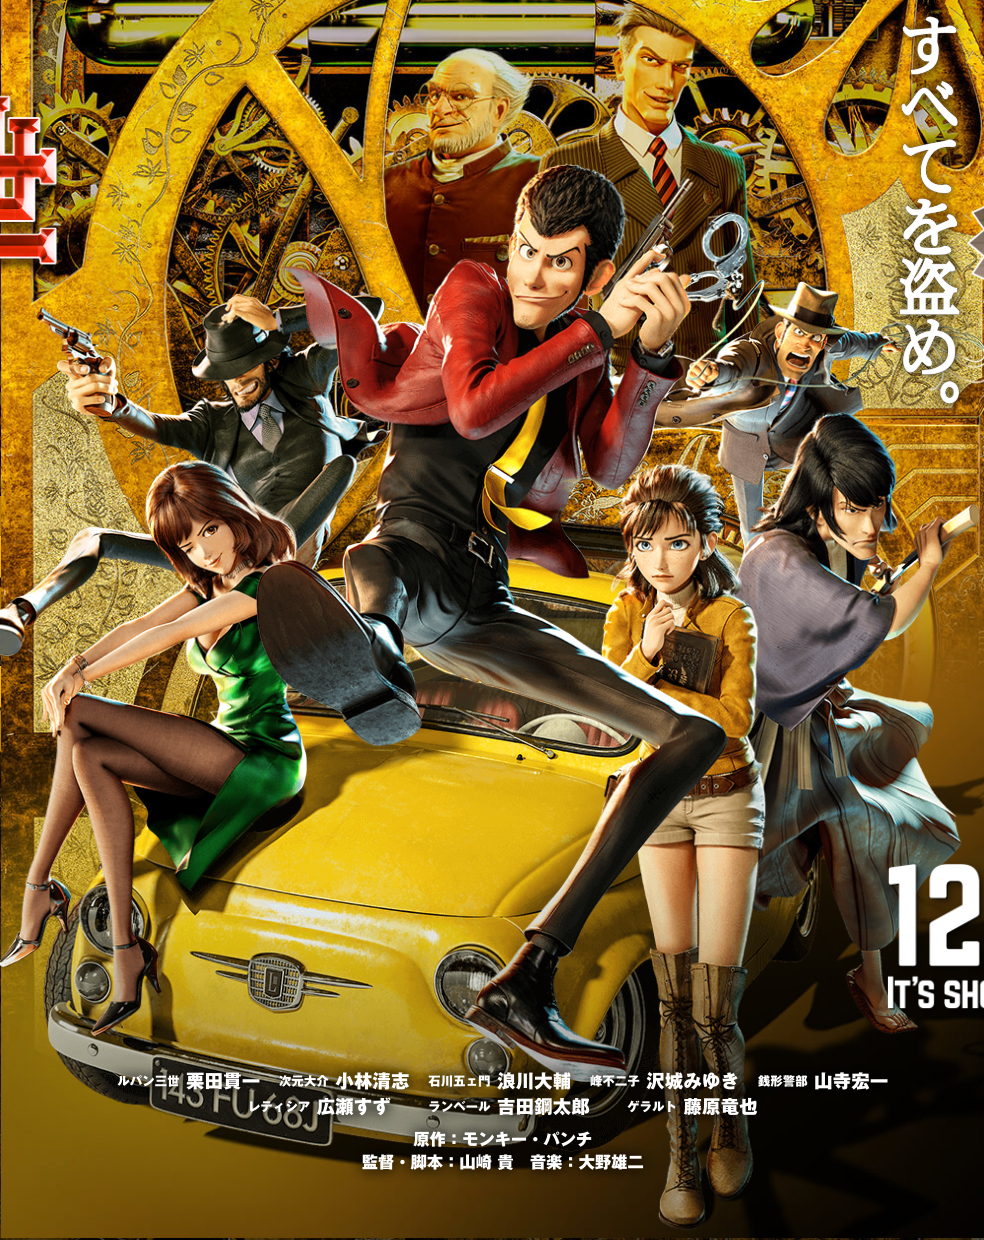 Le Film Animation Lupin Iii The First En Trailer Actualités Adkami